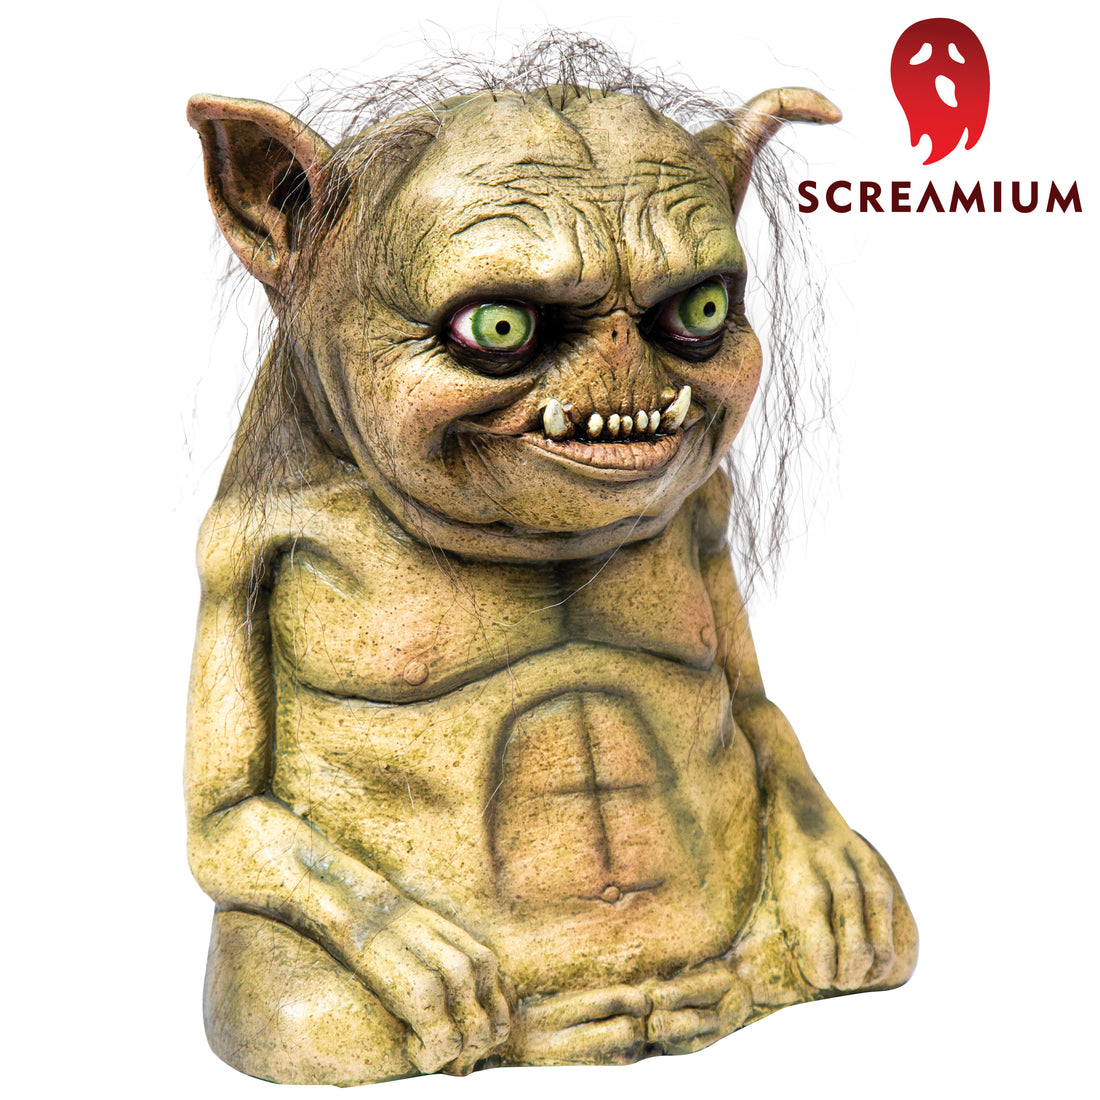 Troglyns FUNGUS Prop Troll Gremlin Monster with Stringy Hair Halloween Decoration